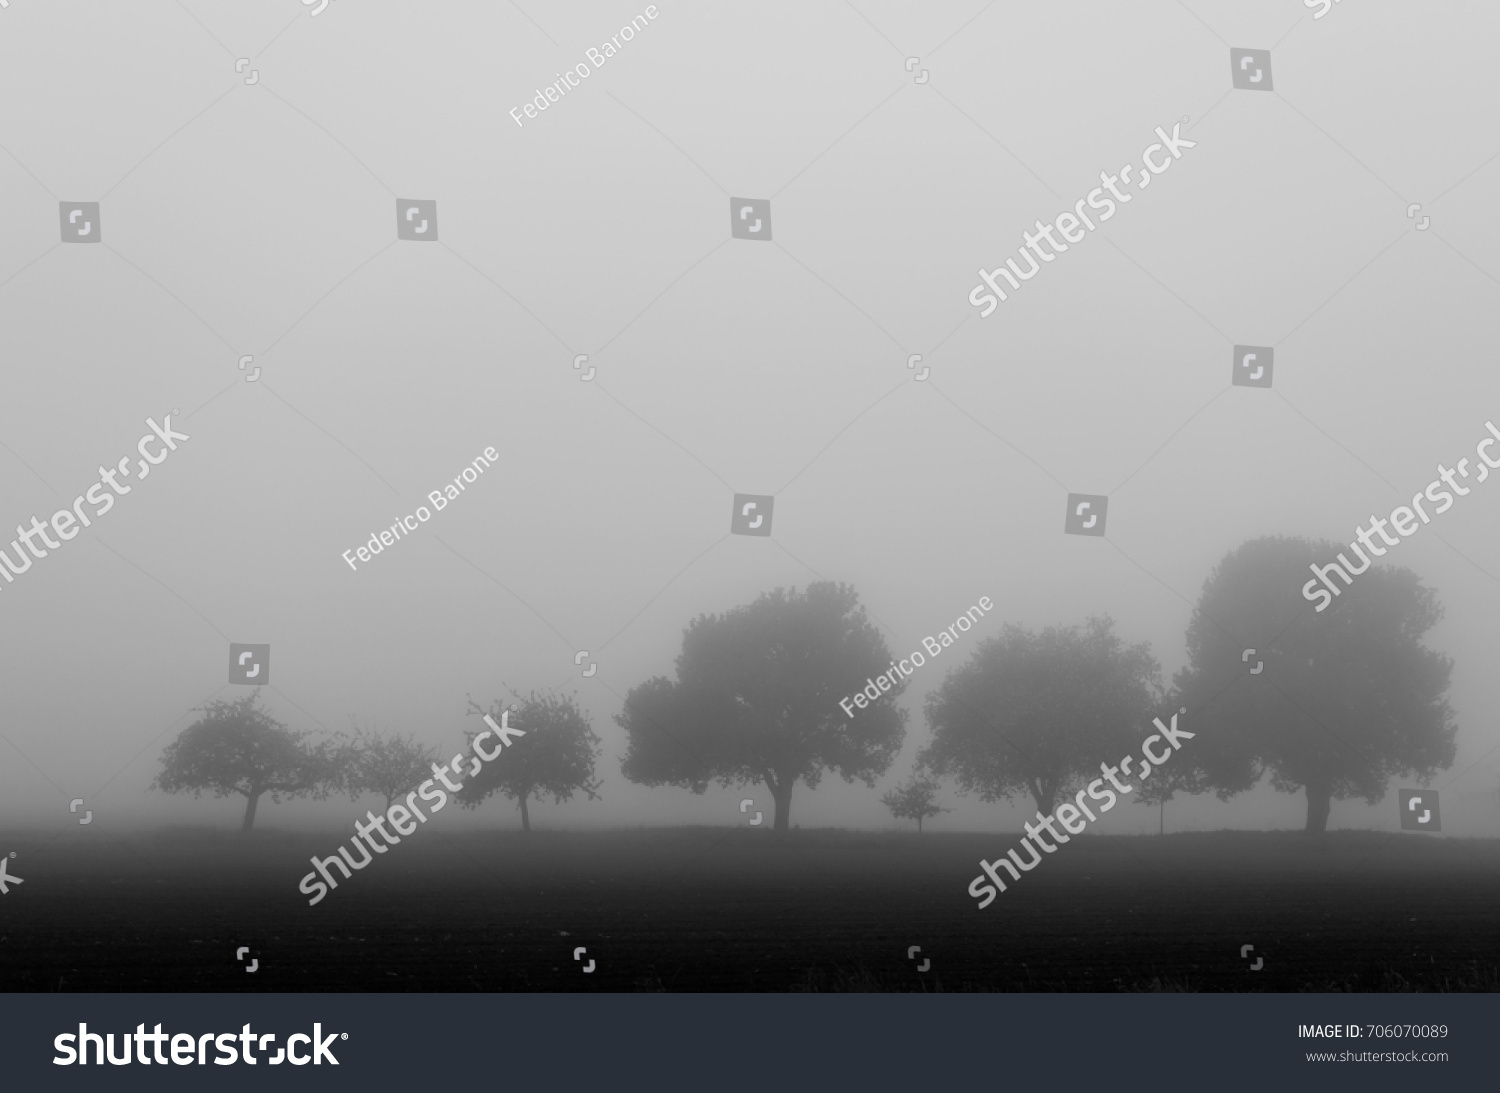 stock-photo-a-row-of-trees-in-the-fog-mo